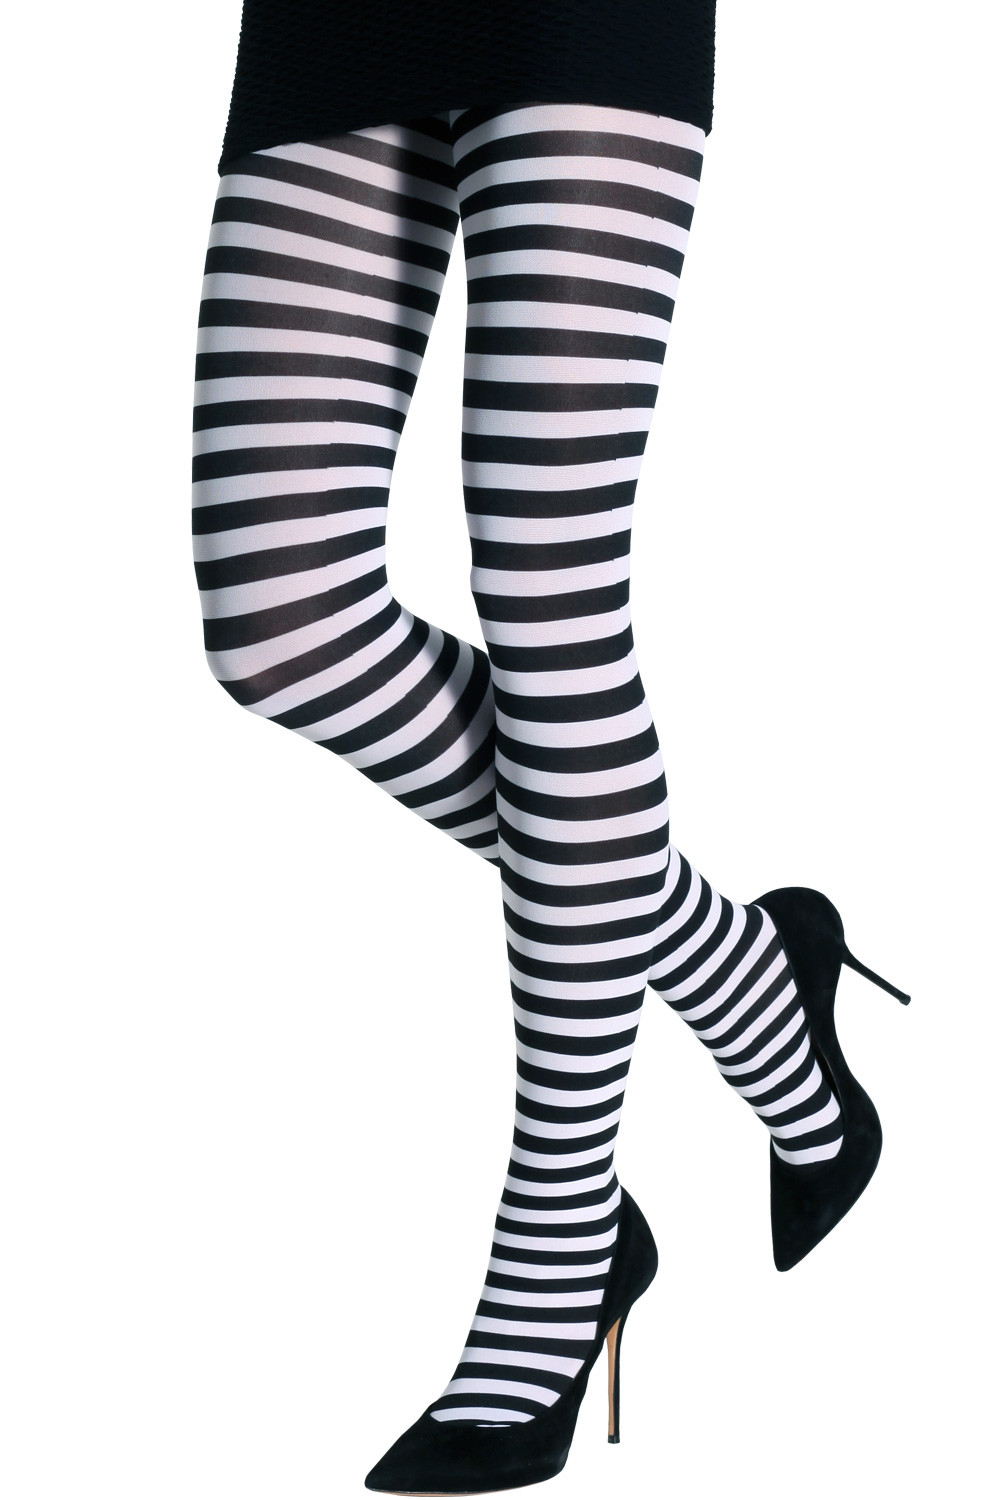 Black and White Vertical Striped Tights - Inspire Uplift